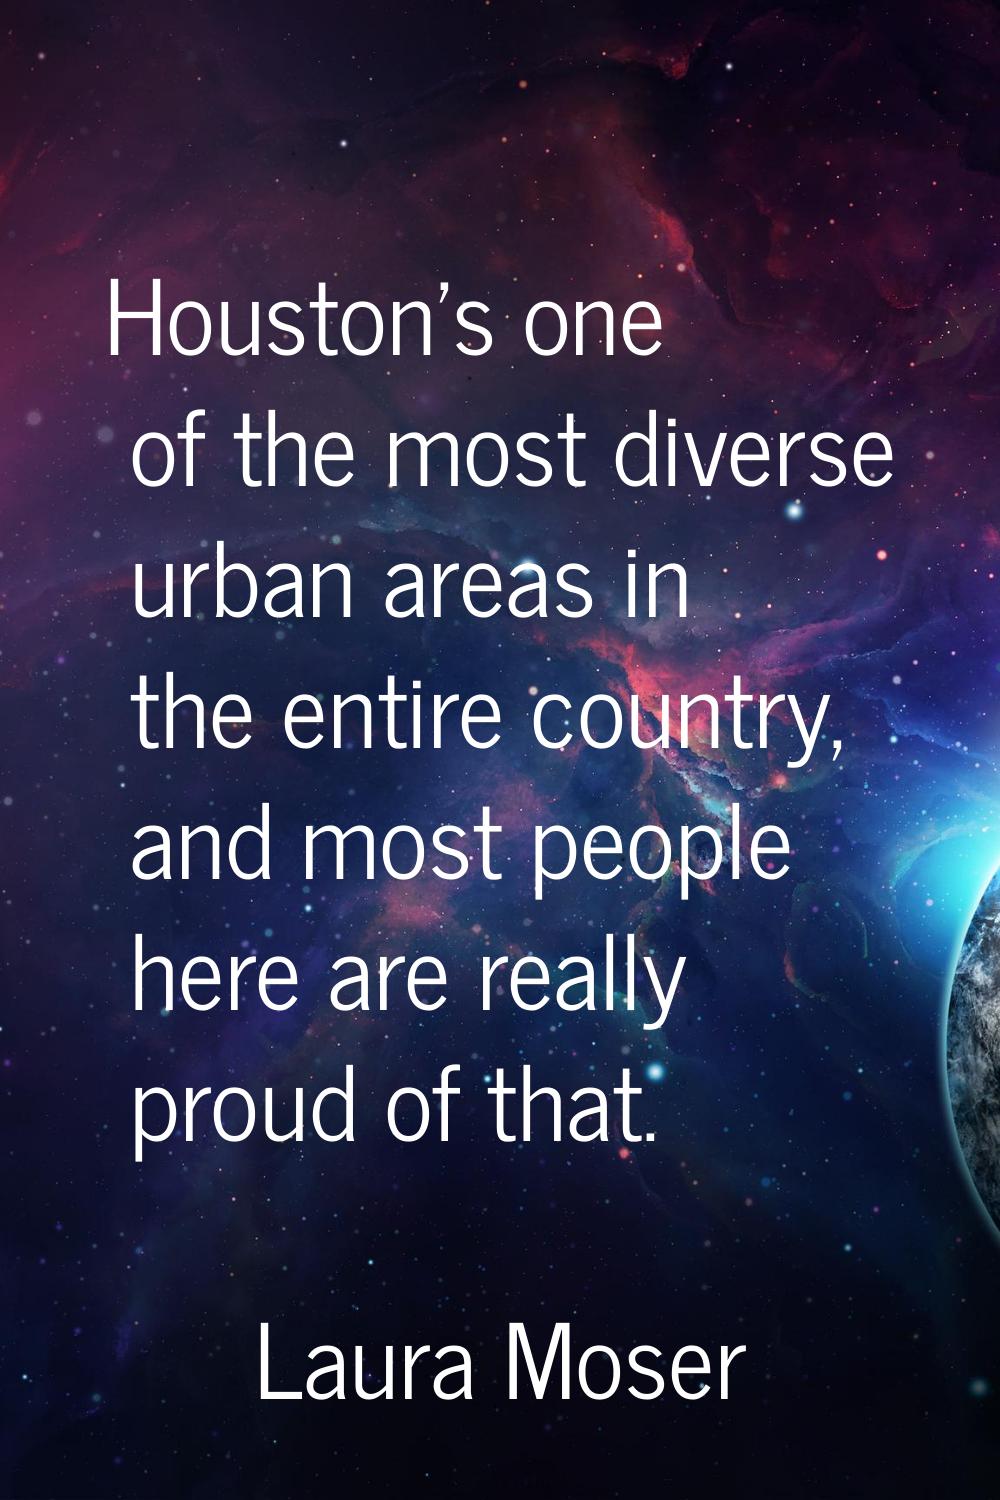 Houston's one of the most diverse urban areas in the entire country, and most people here are reall